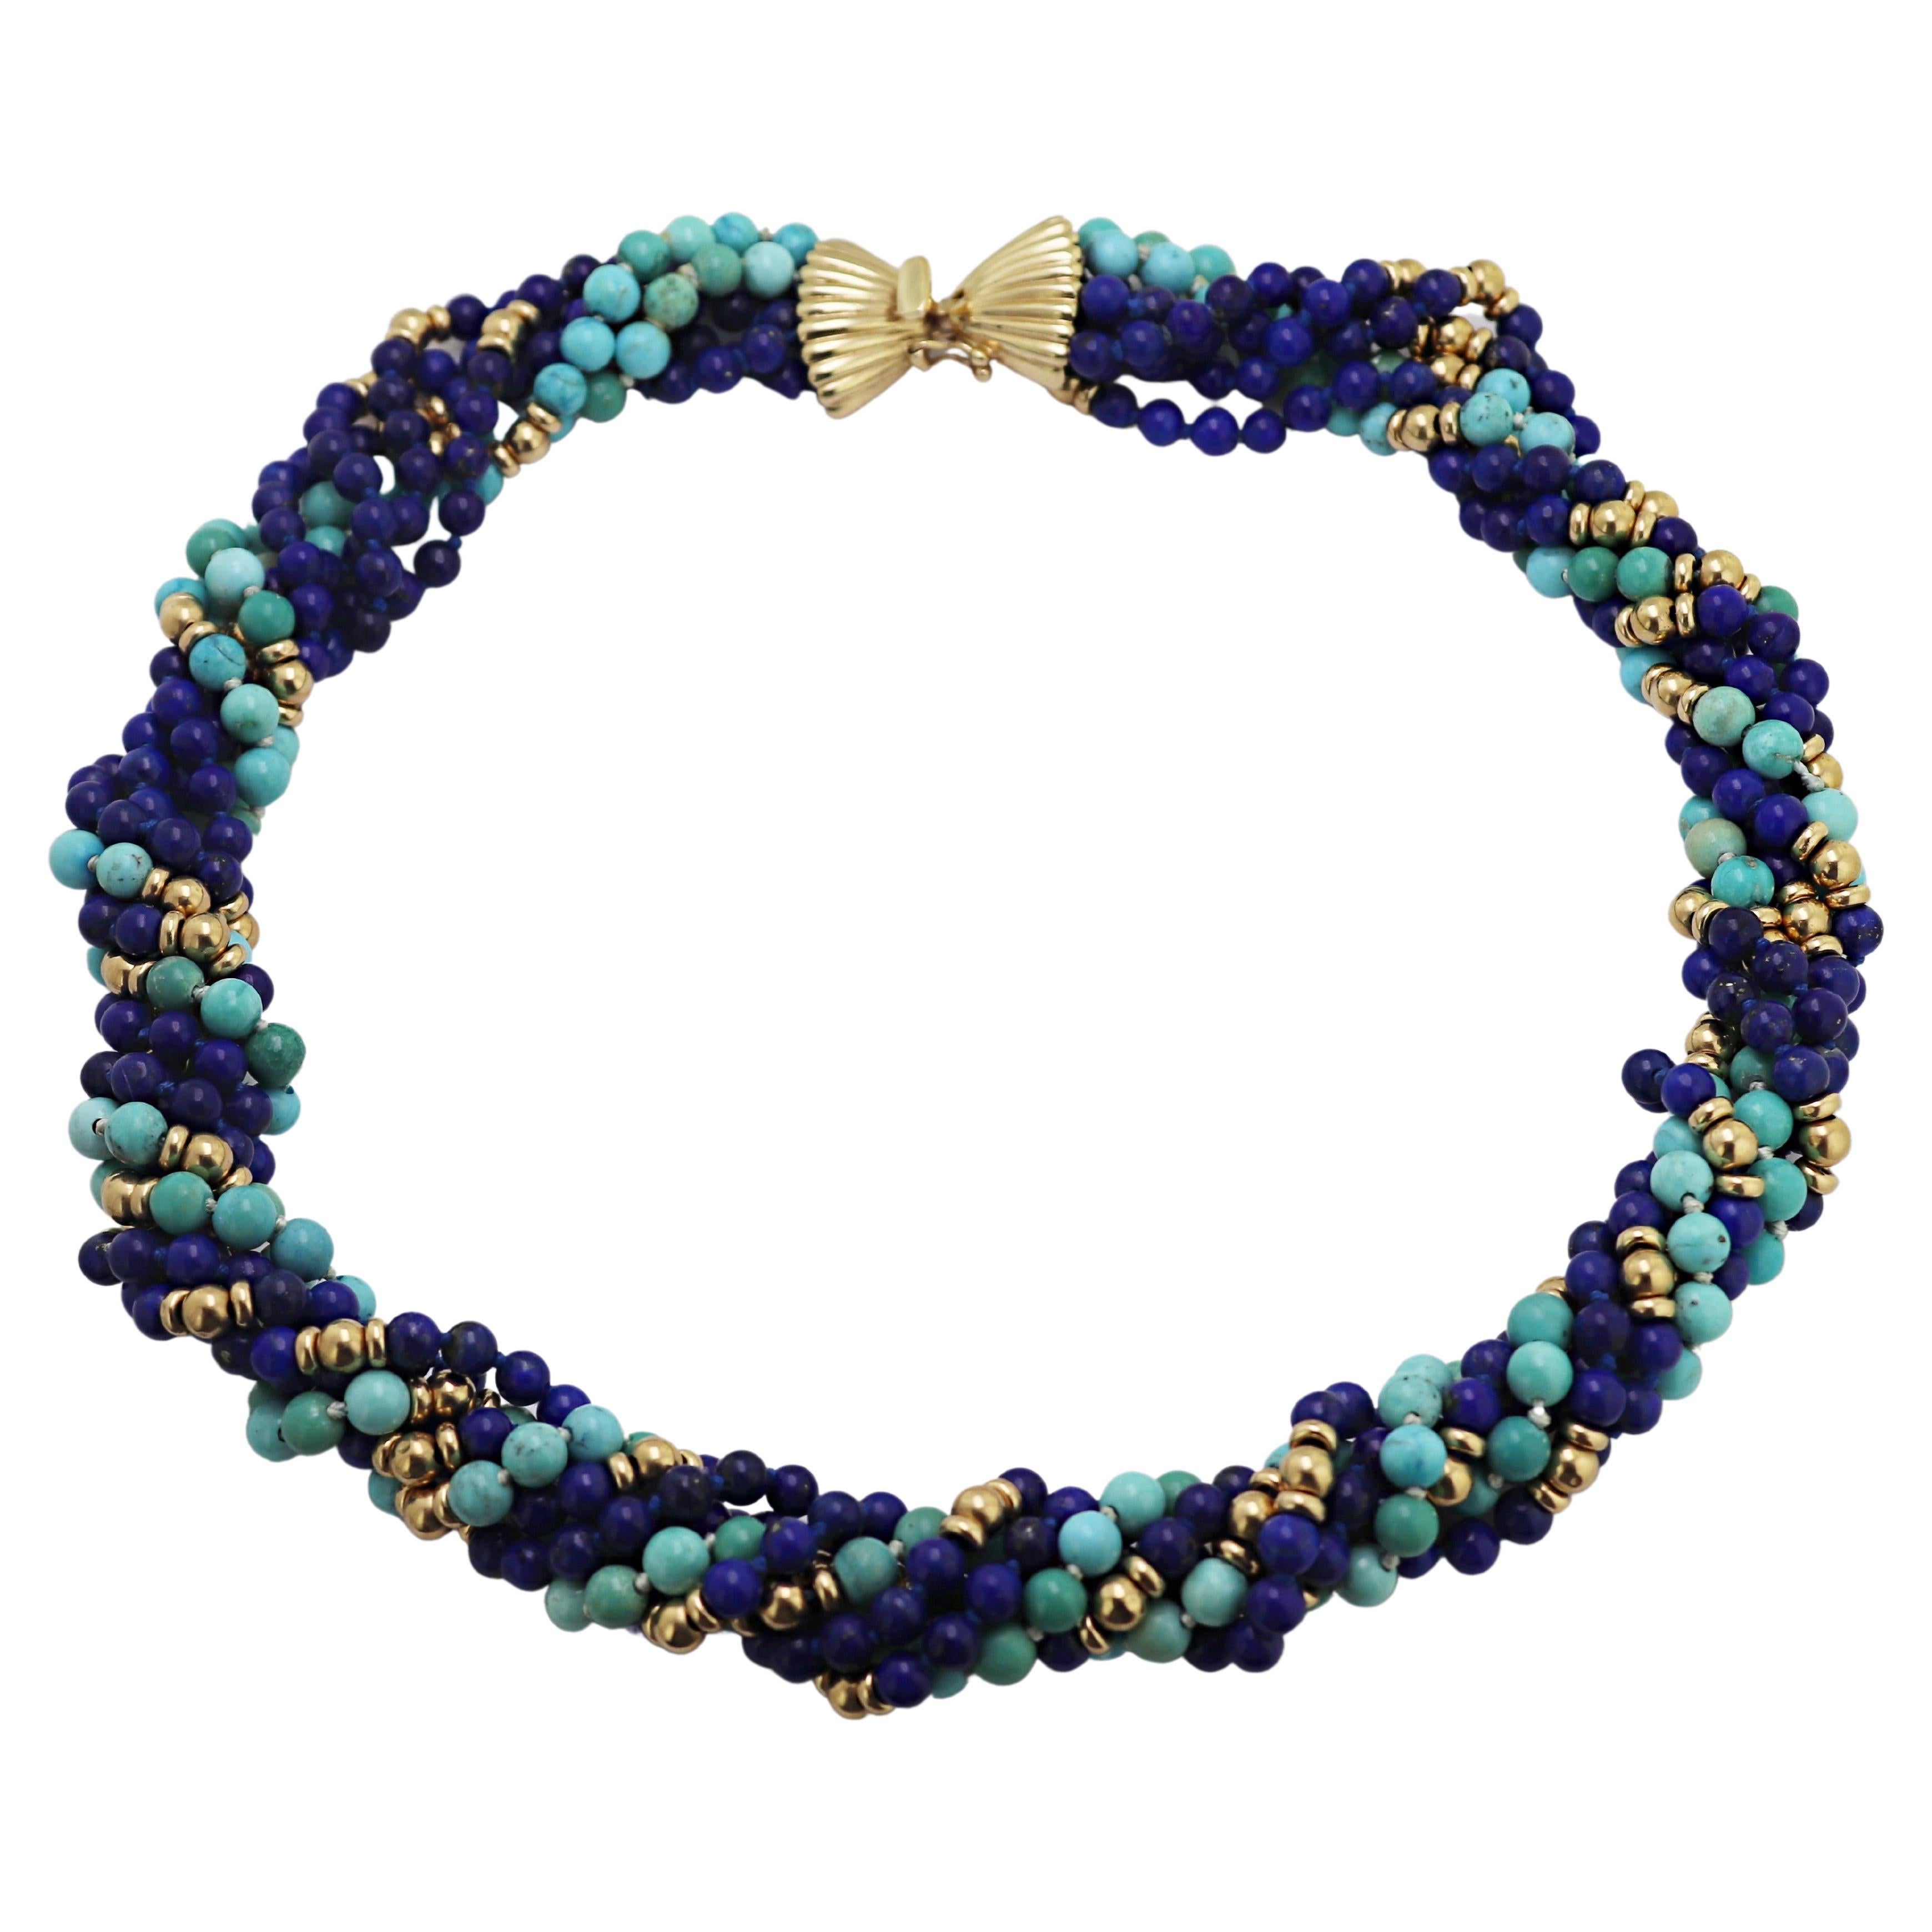 Lapis Lazuli, and Turquoise Bead, Yellow Gold Multi-Strand Necklace